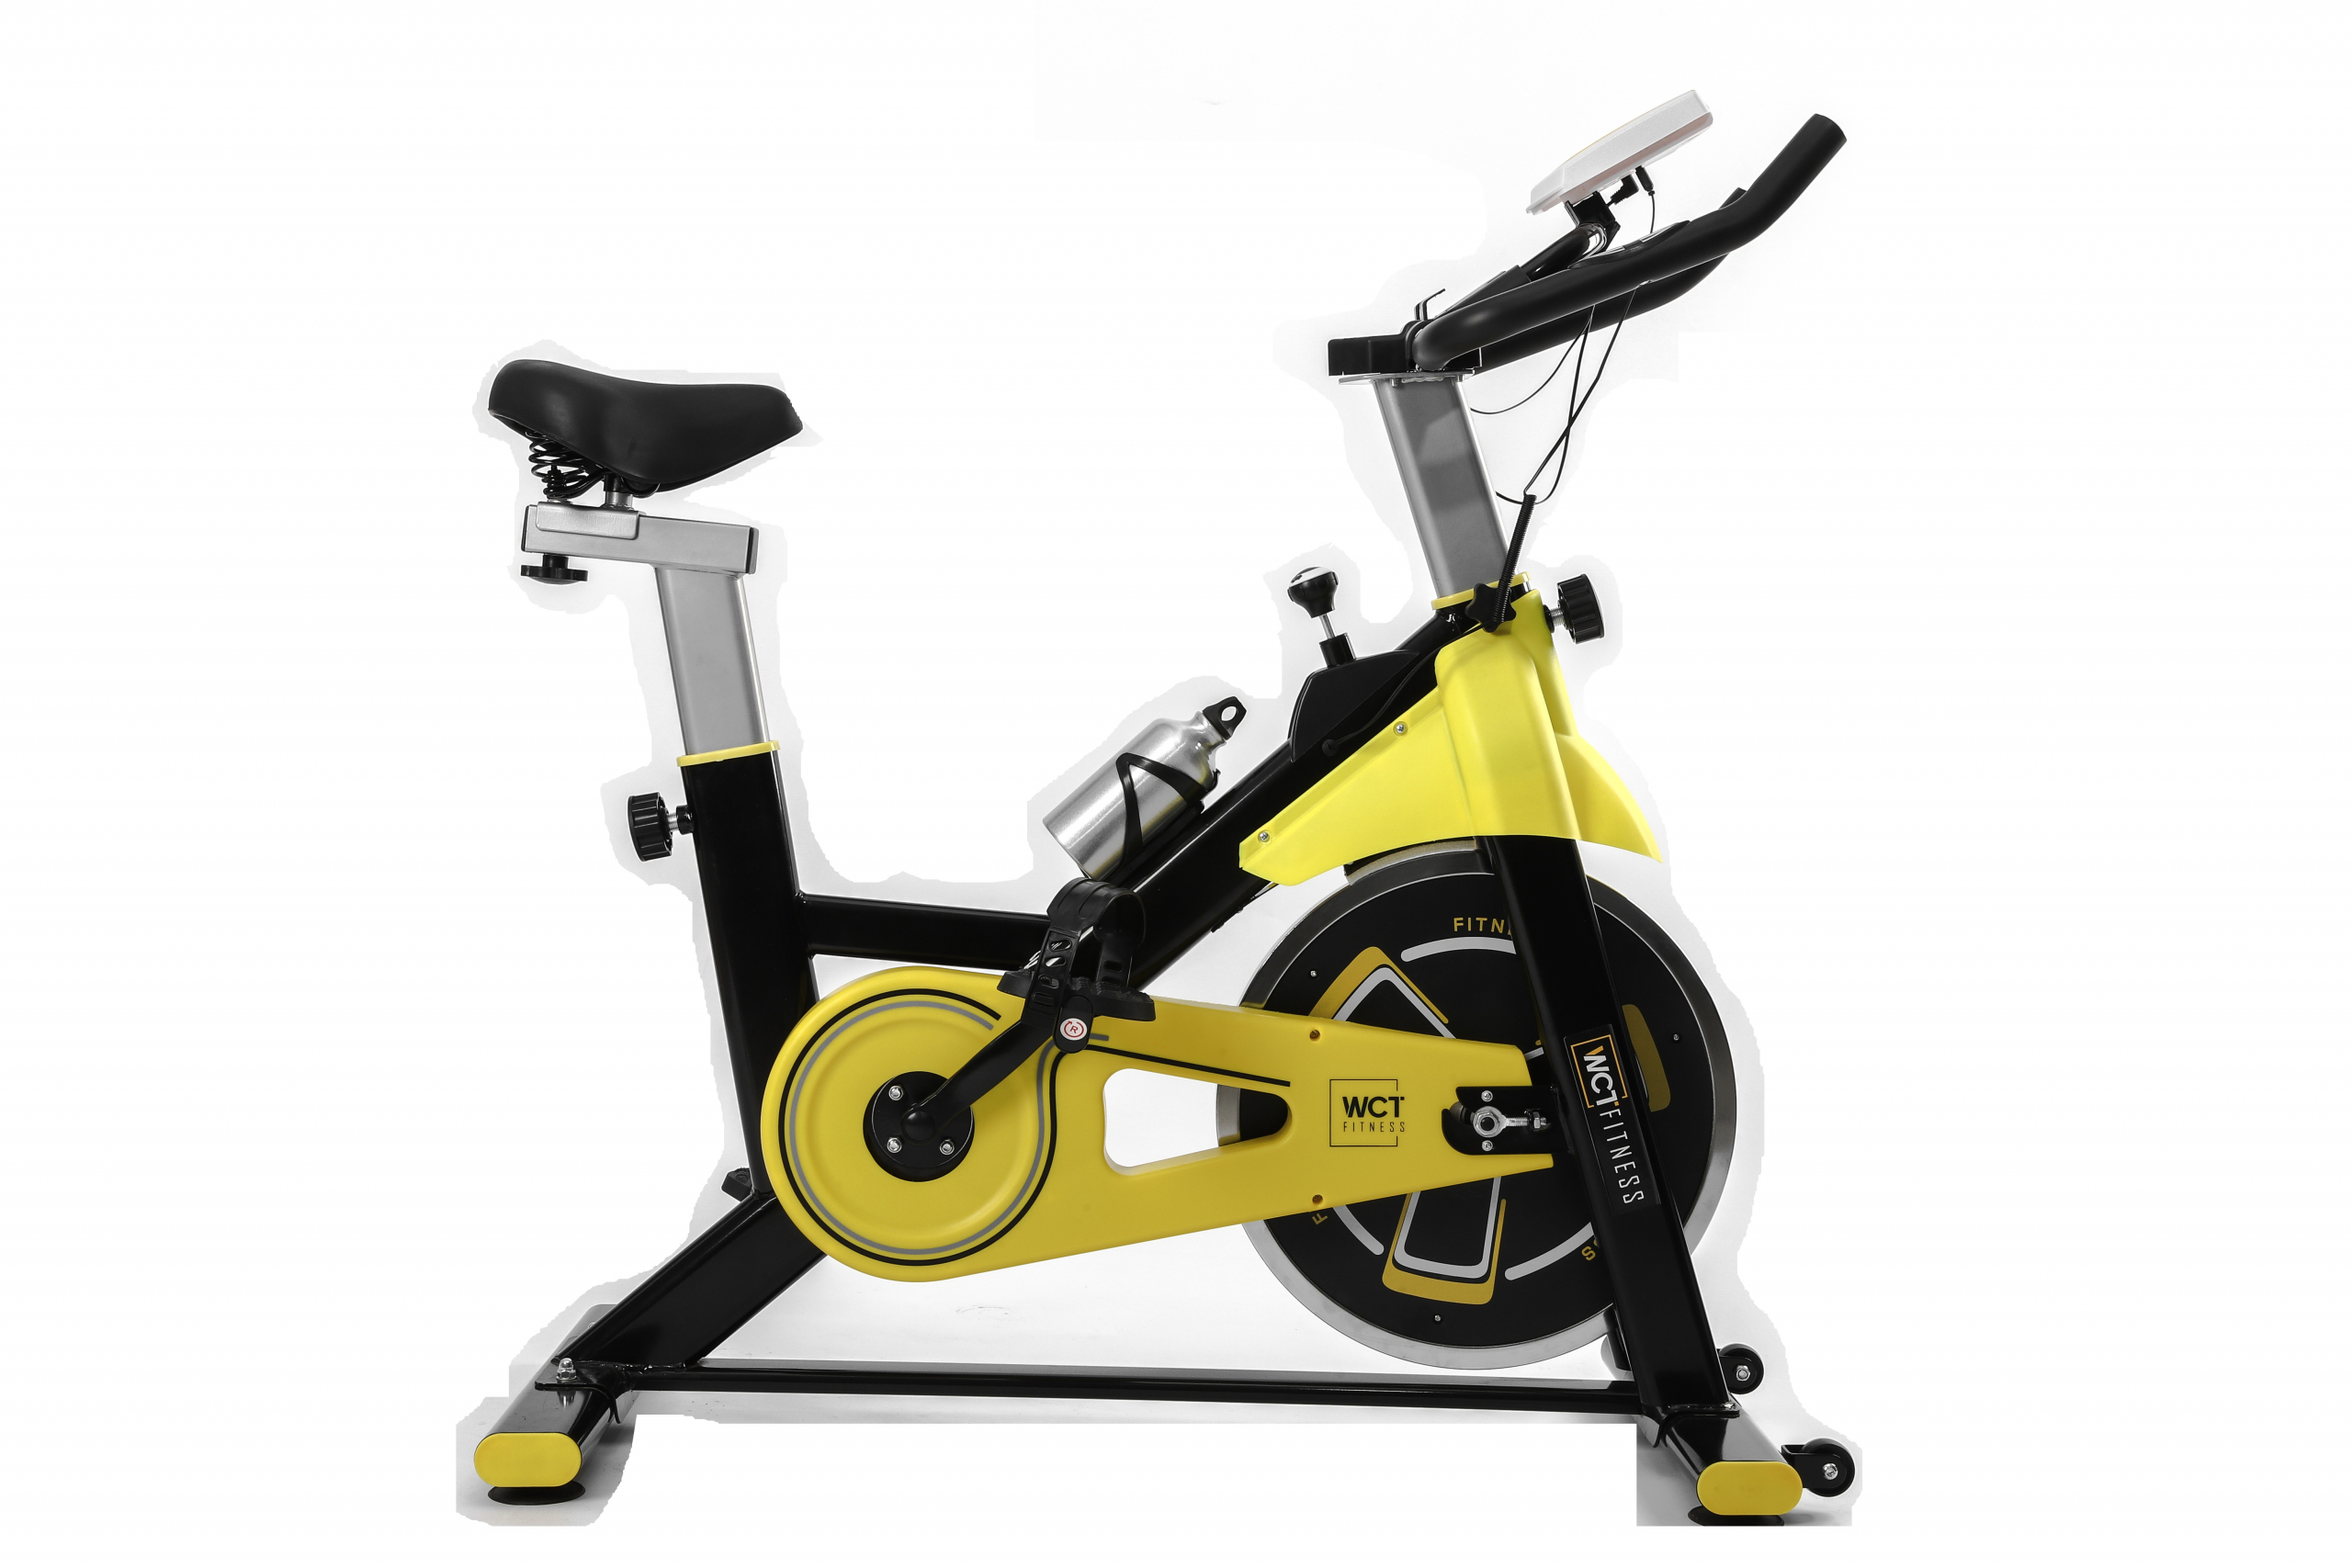 https://www.wct.com.br/site/uploads/2021/03/10100019-BICICLETA-SPINNING-WCT-FITNESS-01-scaled.jpg